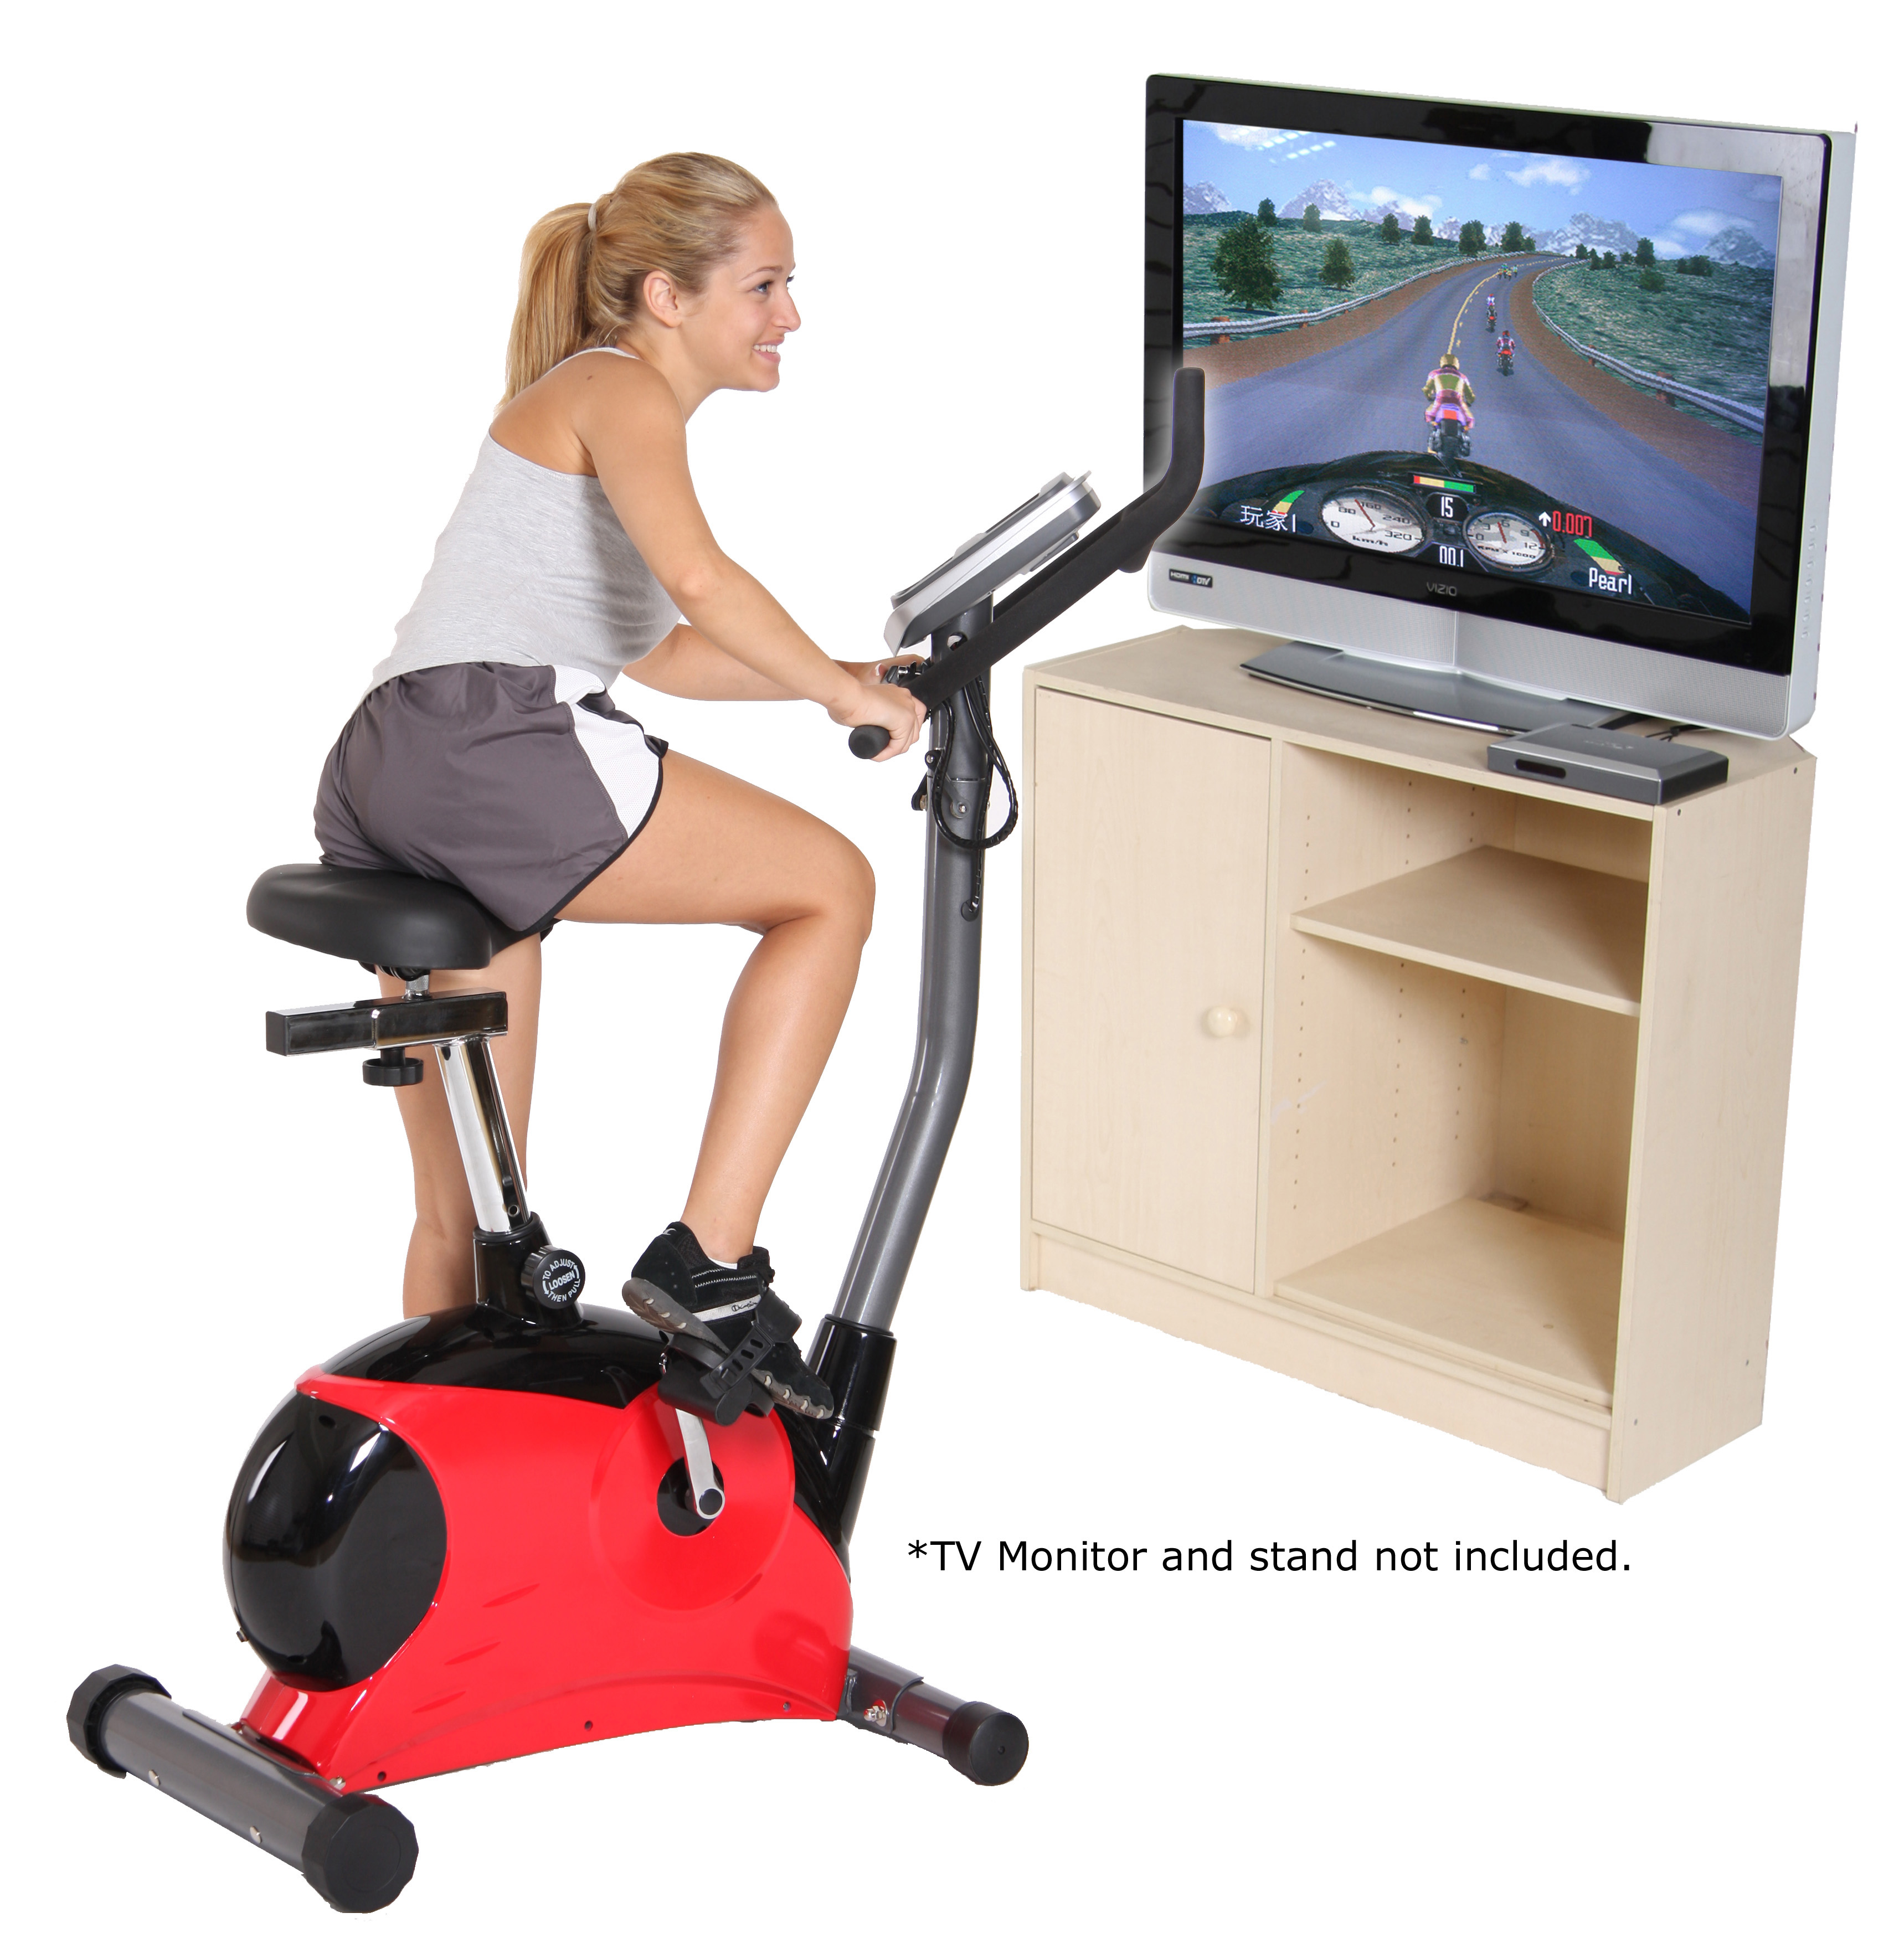 Game Rider BGB300 Gaming Bike and System